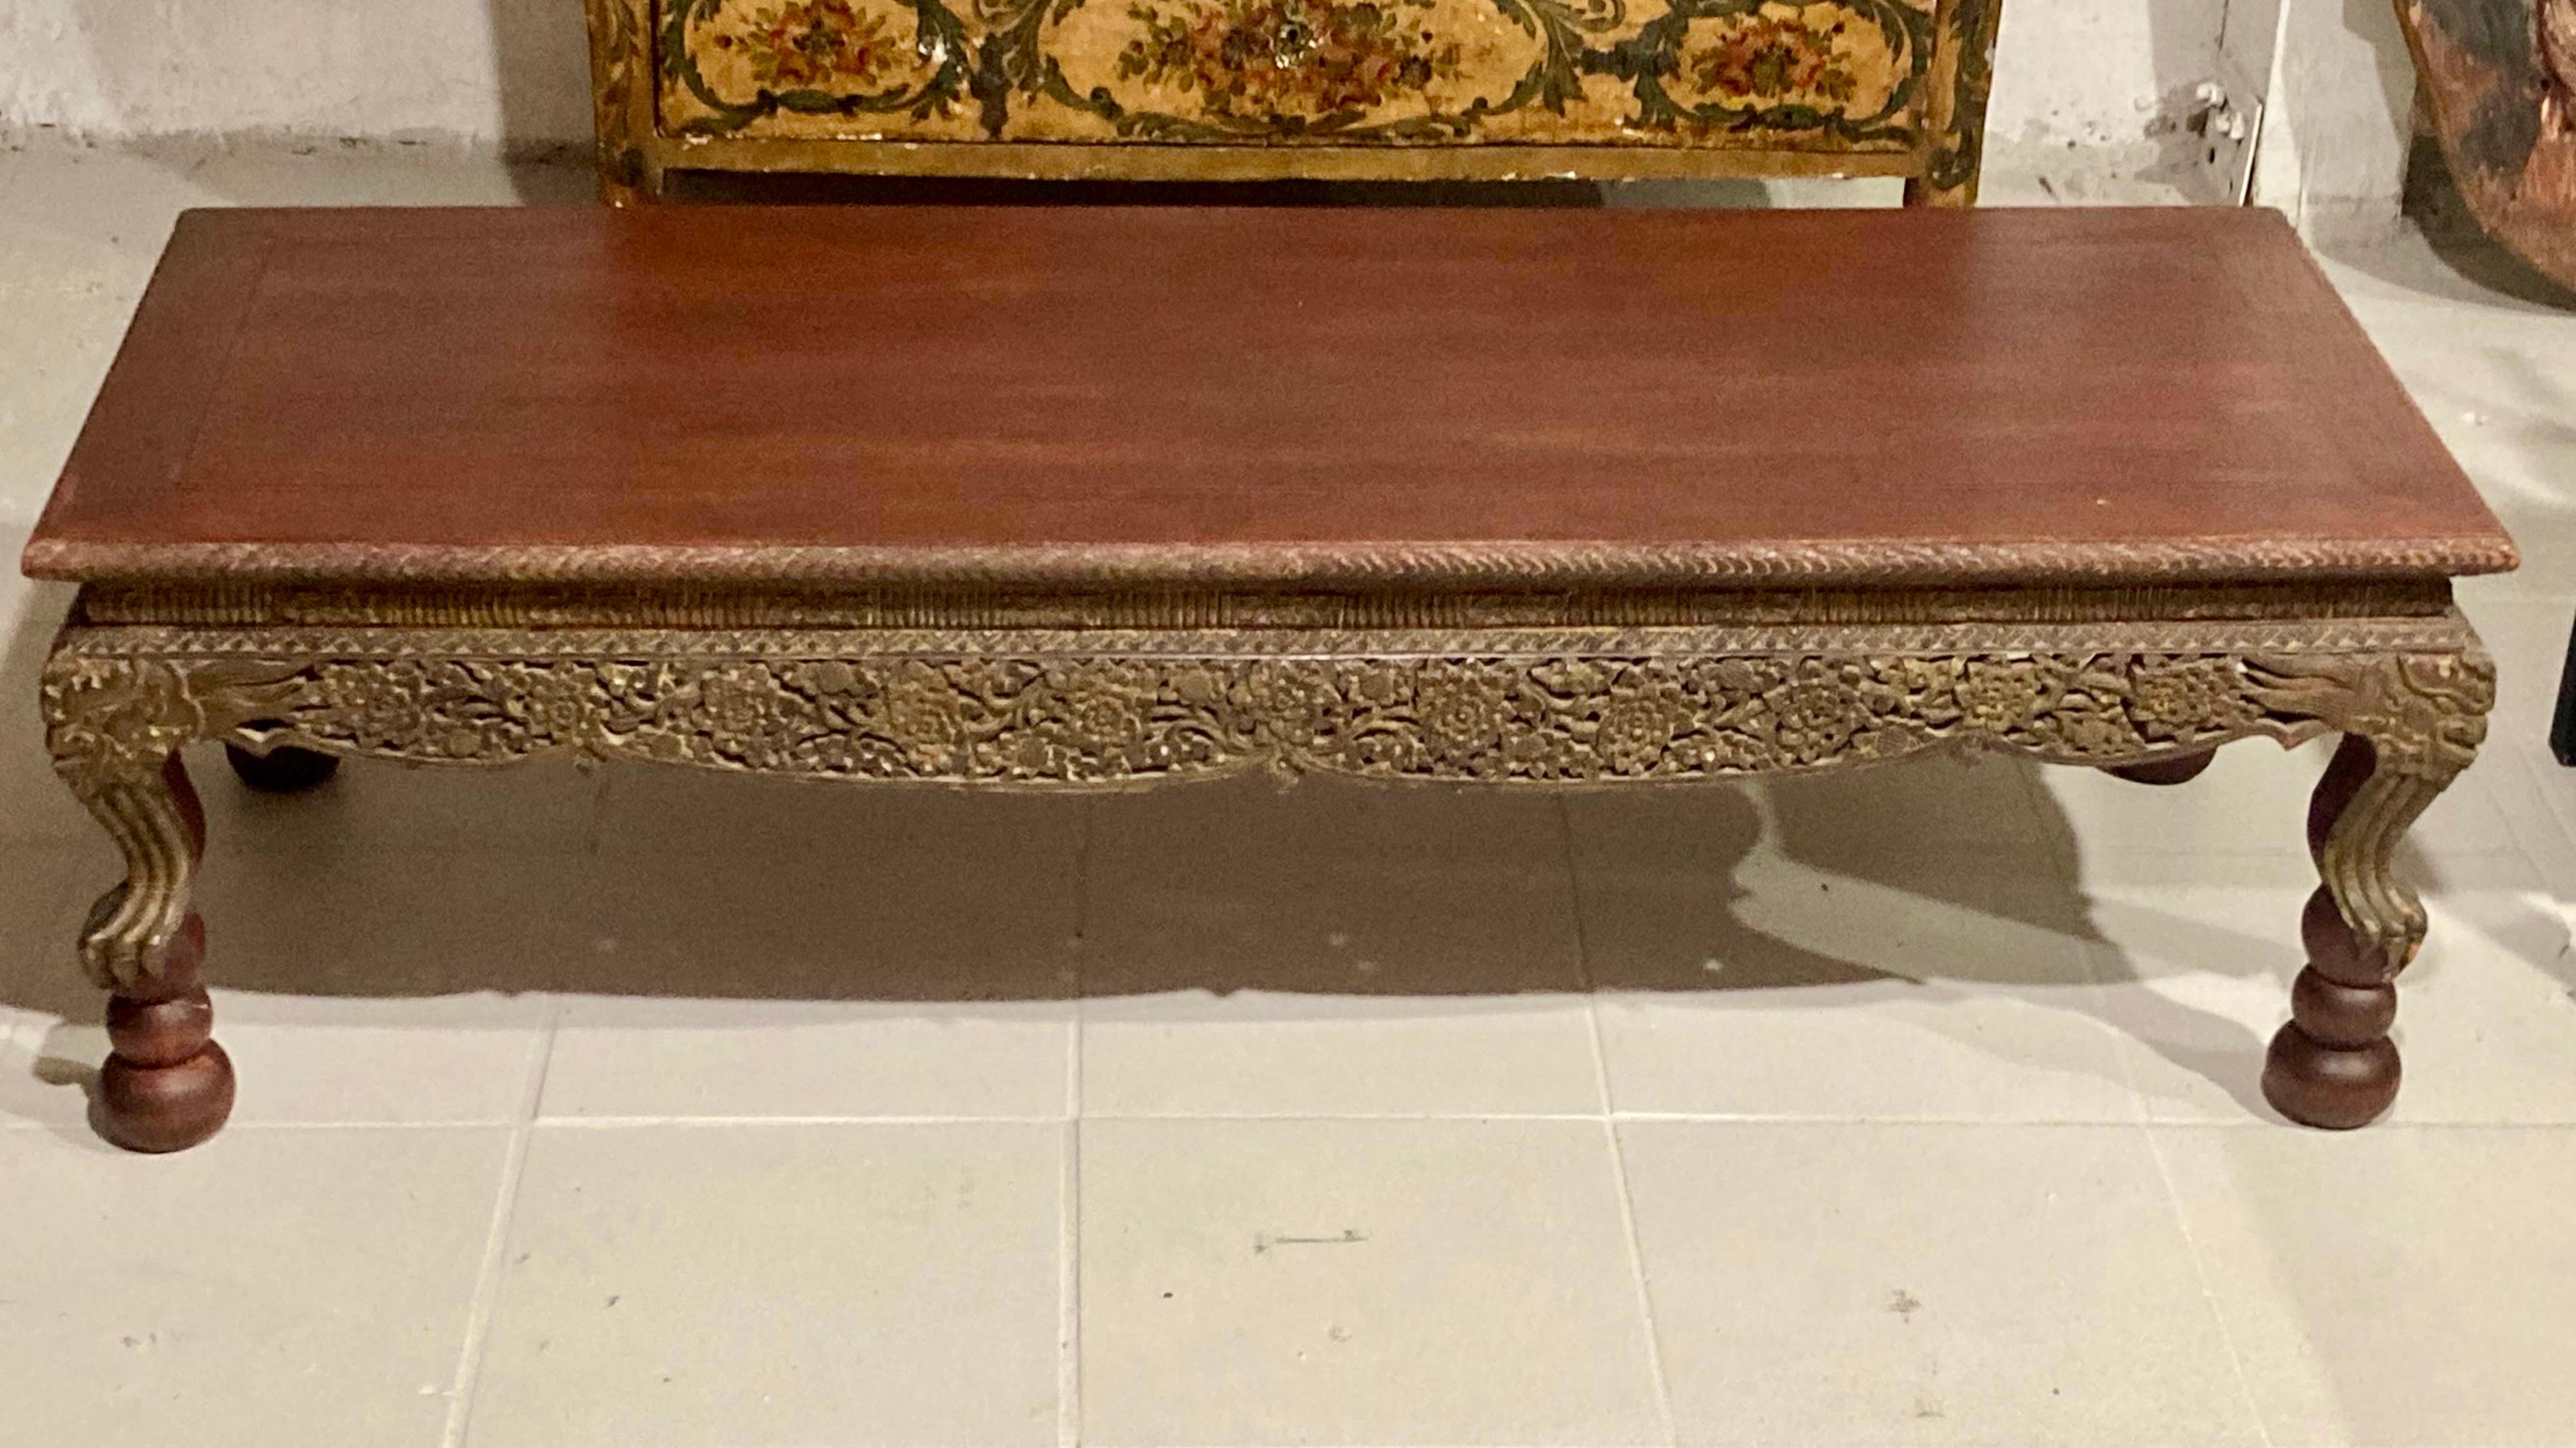 Beautiful Asian carved wood coffee table with nice detail work. Very pretty finish on the surface. Nice simple top to highlight the carving details. Fun fact: the table is from the Estate of Kirk Douglas.